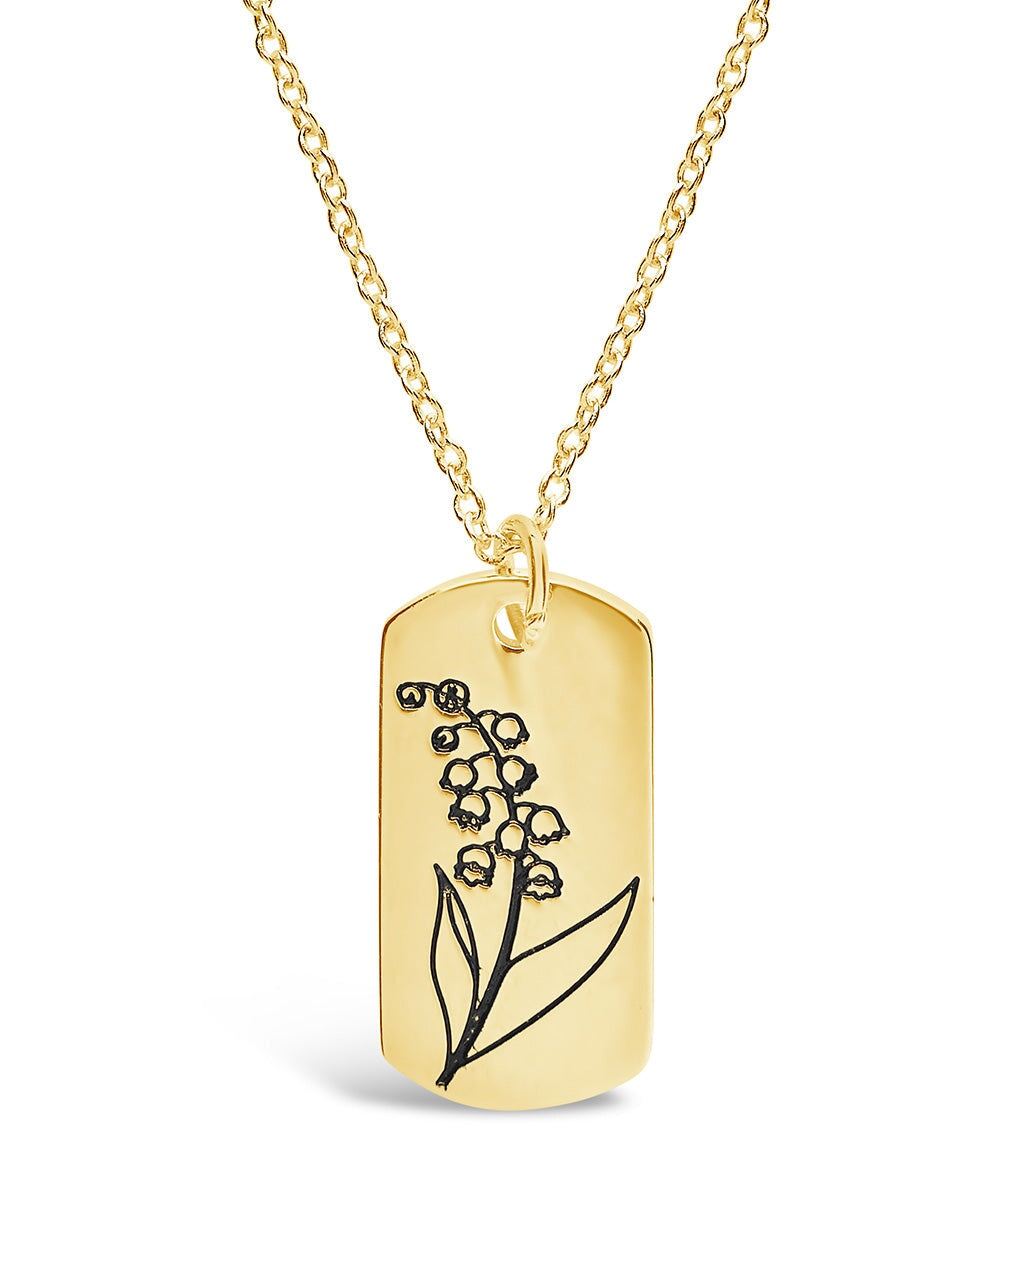 Birth Flower Pendant Necklace Sterling Forever Gold May / Lily of the Valley 